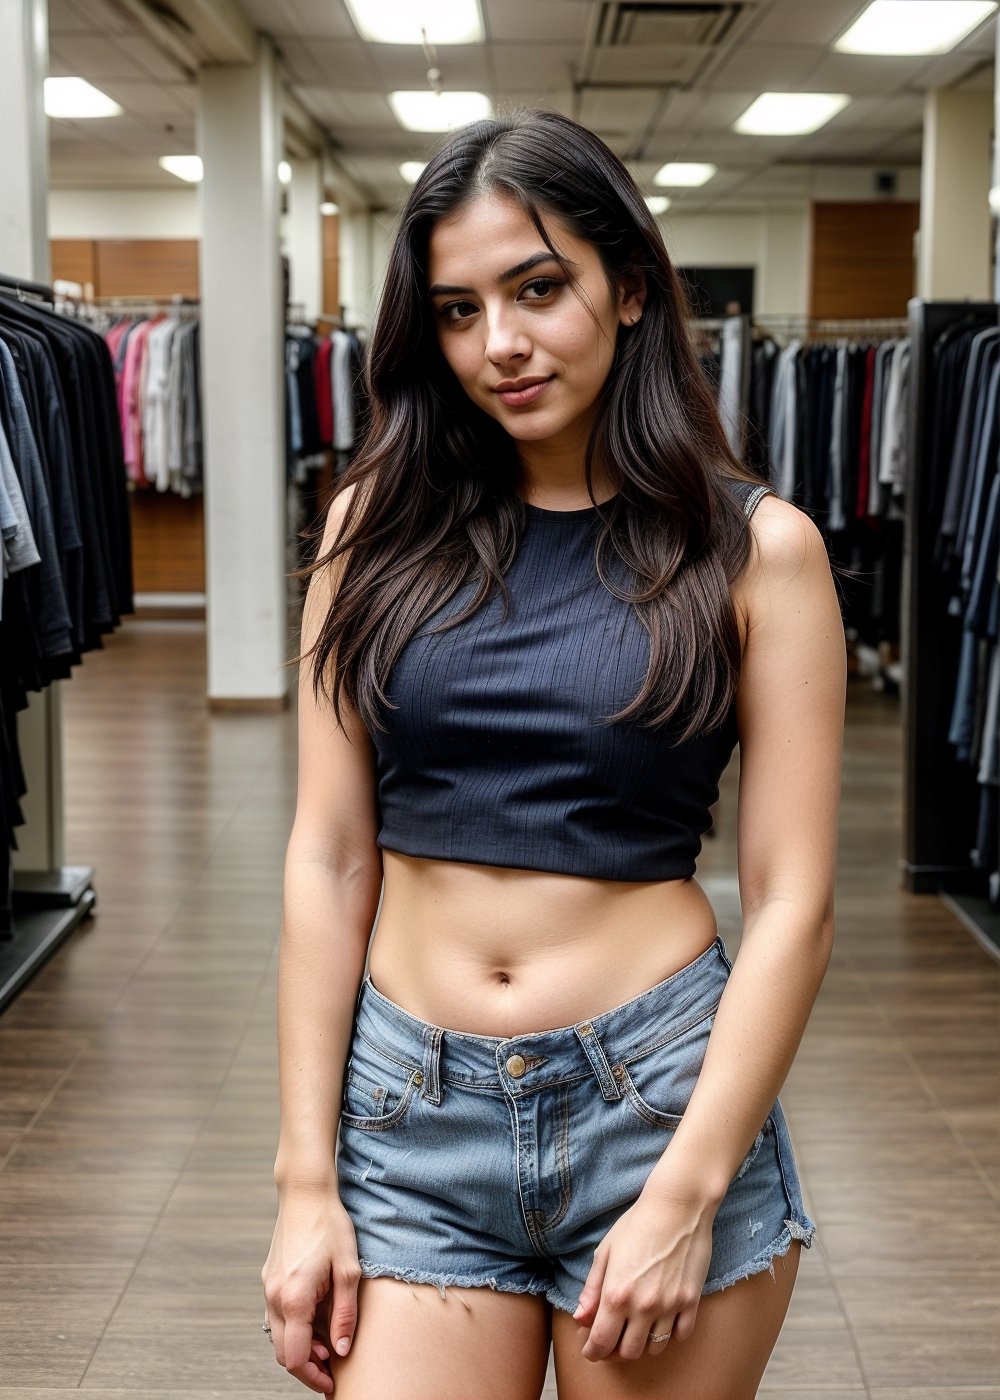  beautiful cute young attractive girl 22 year old, cute, instagram model,long black hair, at a garment shop, in try room, full confident, exotic beauty, full of attitude, hair tied, wearing a stylish crop top and denim shorts, full_body, bare_foot.